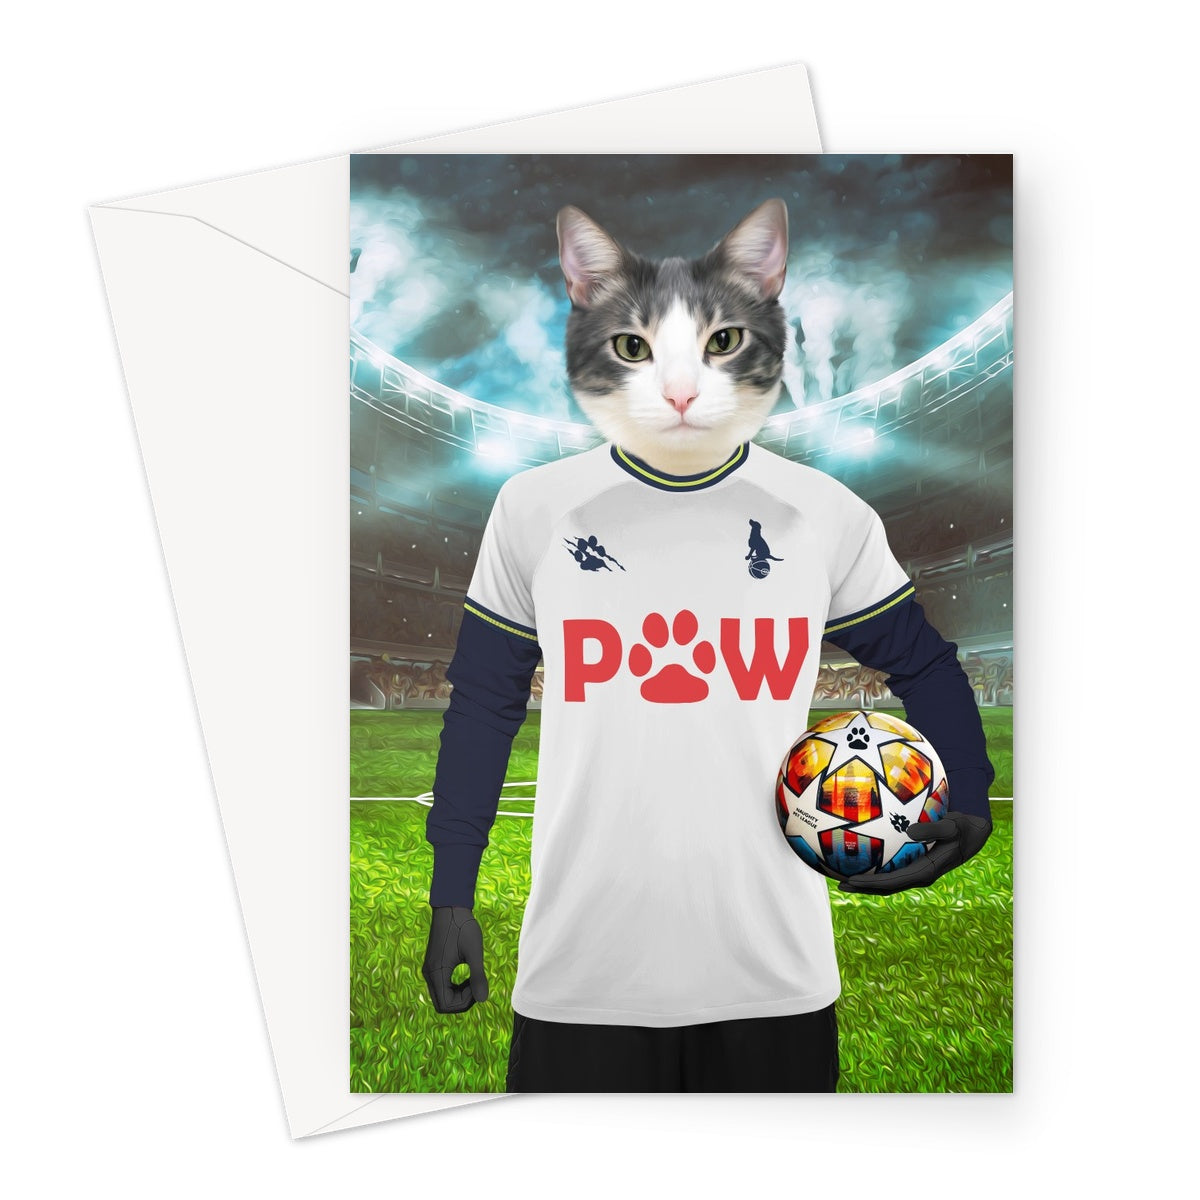 Tottenham Hotspaw Football Club Paw & Glory, paw and glory, professional pet photos, painting of your dog, funny dog paintings, small dog portrait, dog portrait background colors, custom dog painting, pet portraits